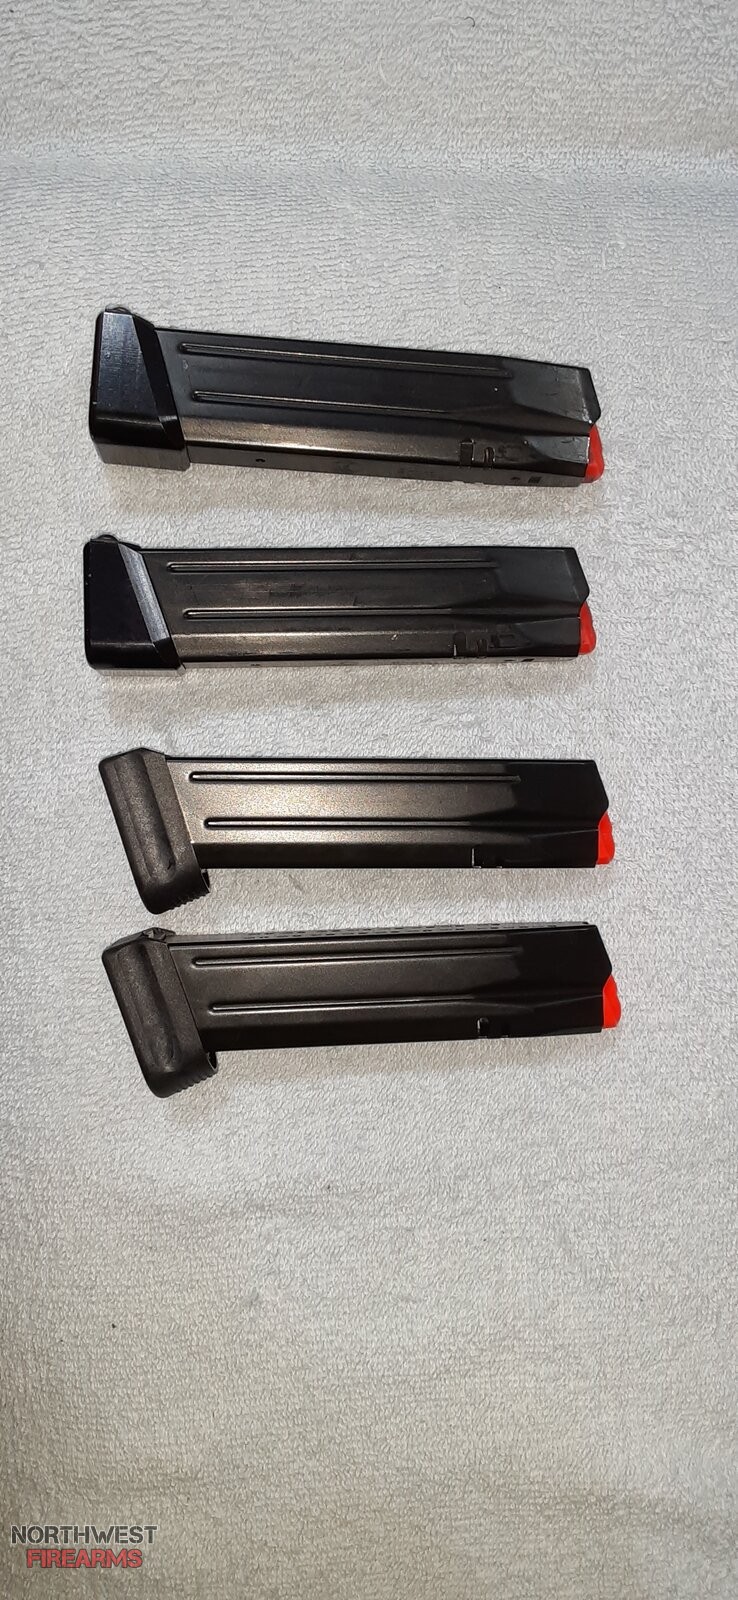 CZ P10F mags for sale.jpg